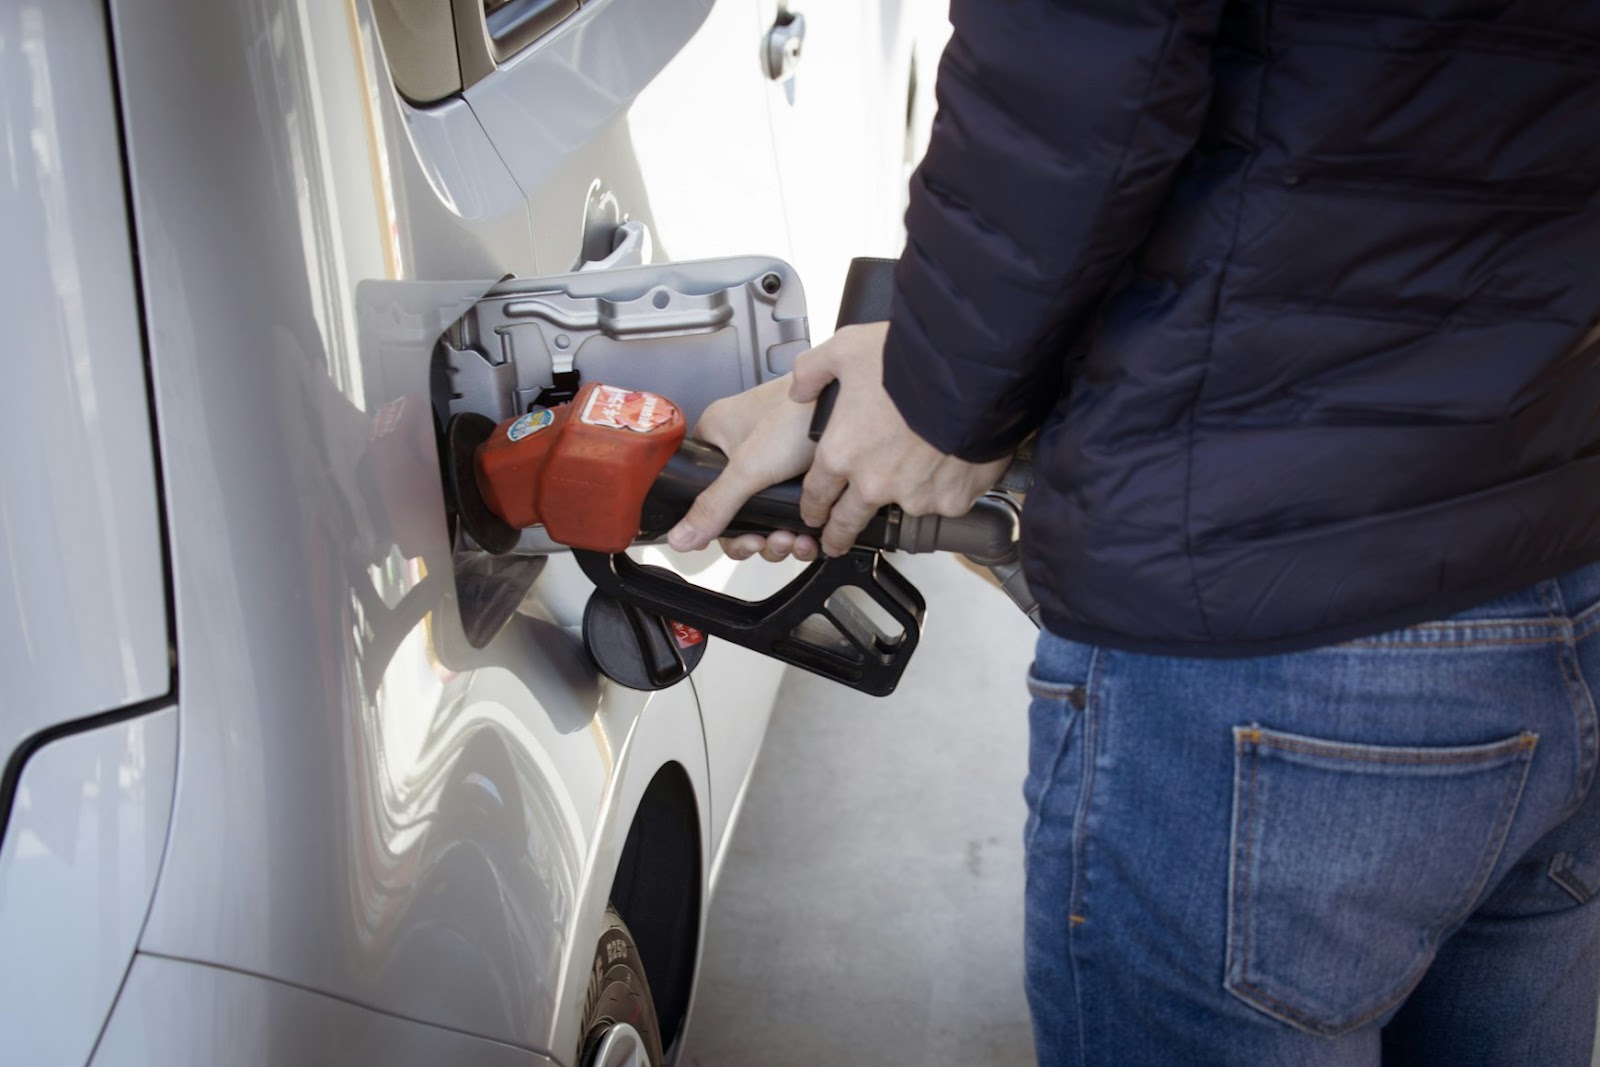 6 Common Myths About Saving Money on Fuel Busted